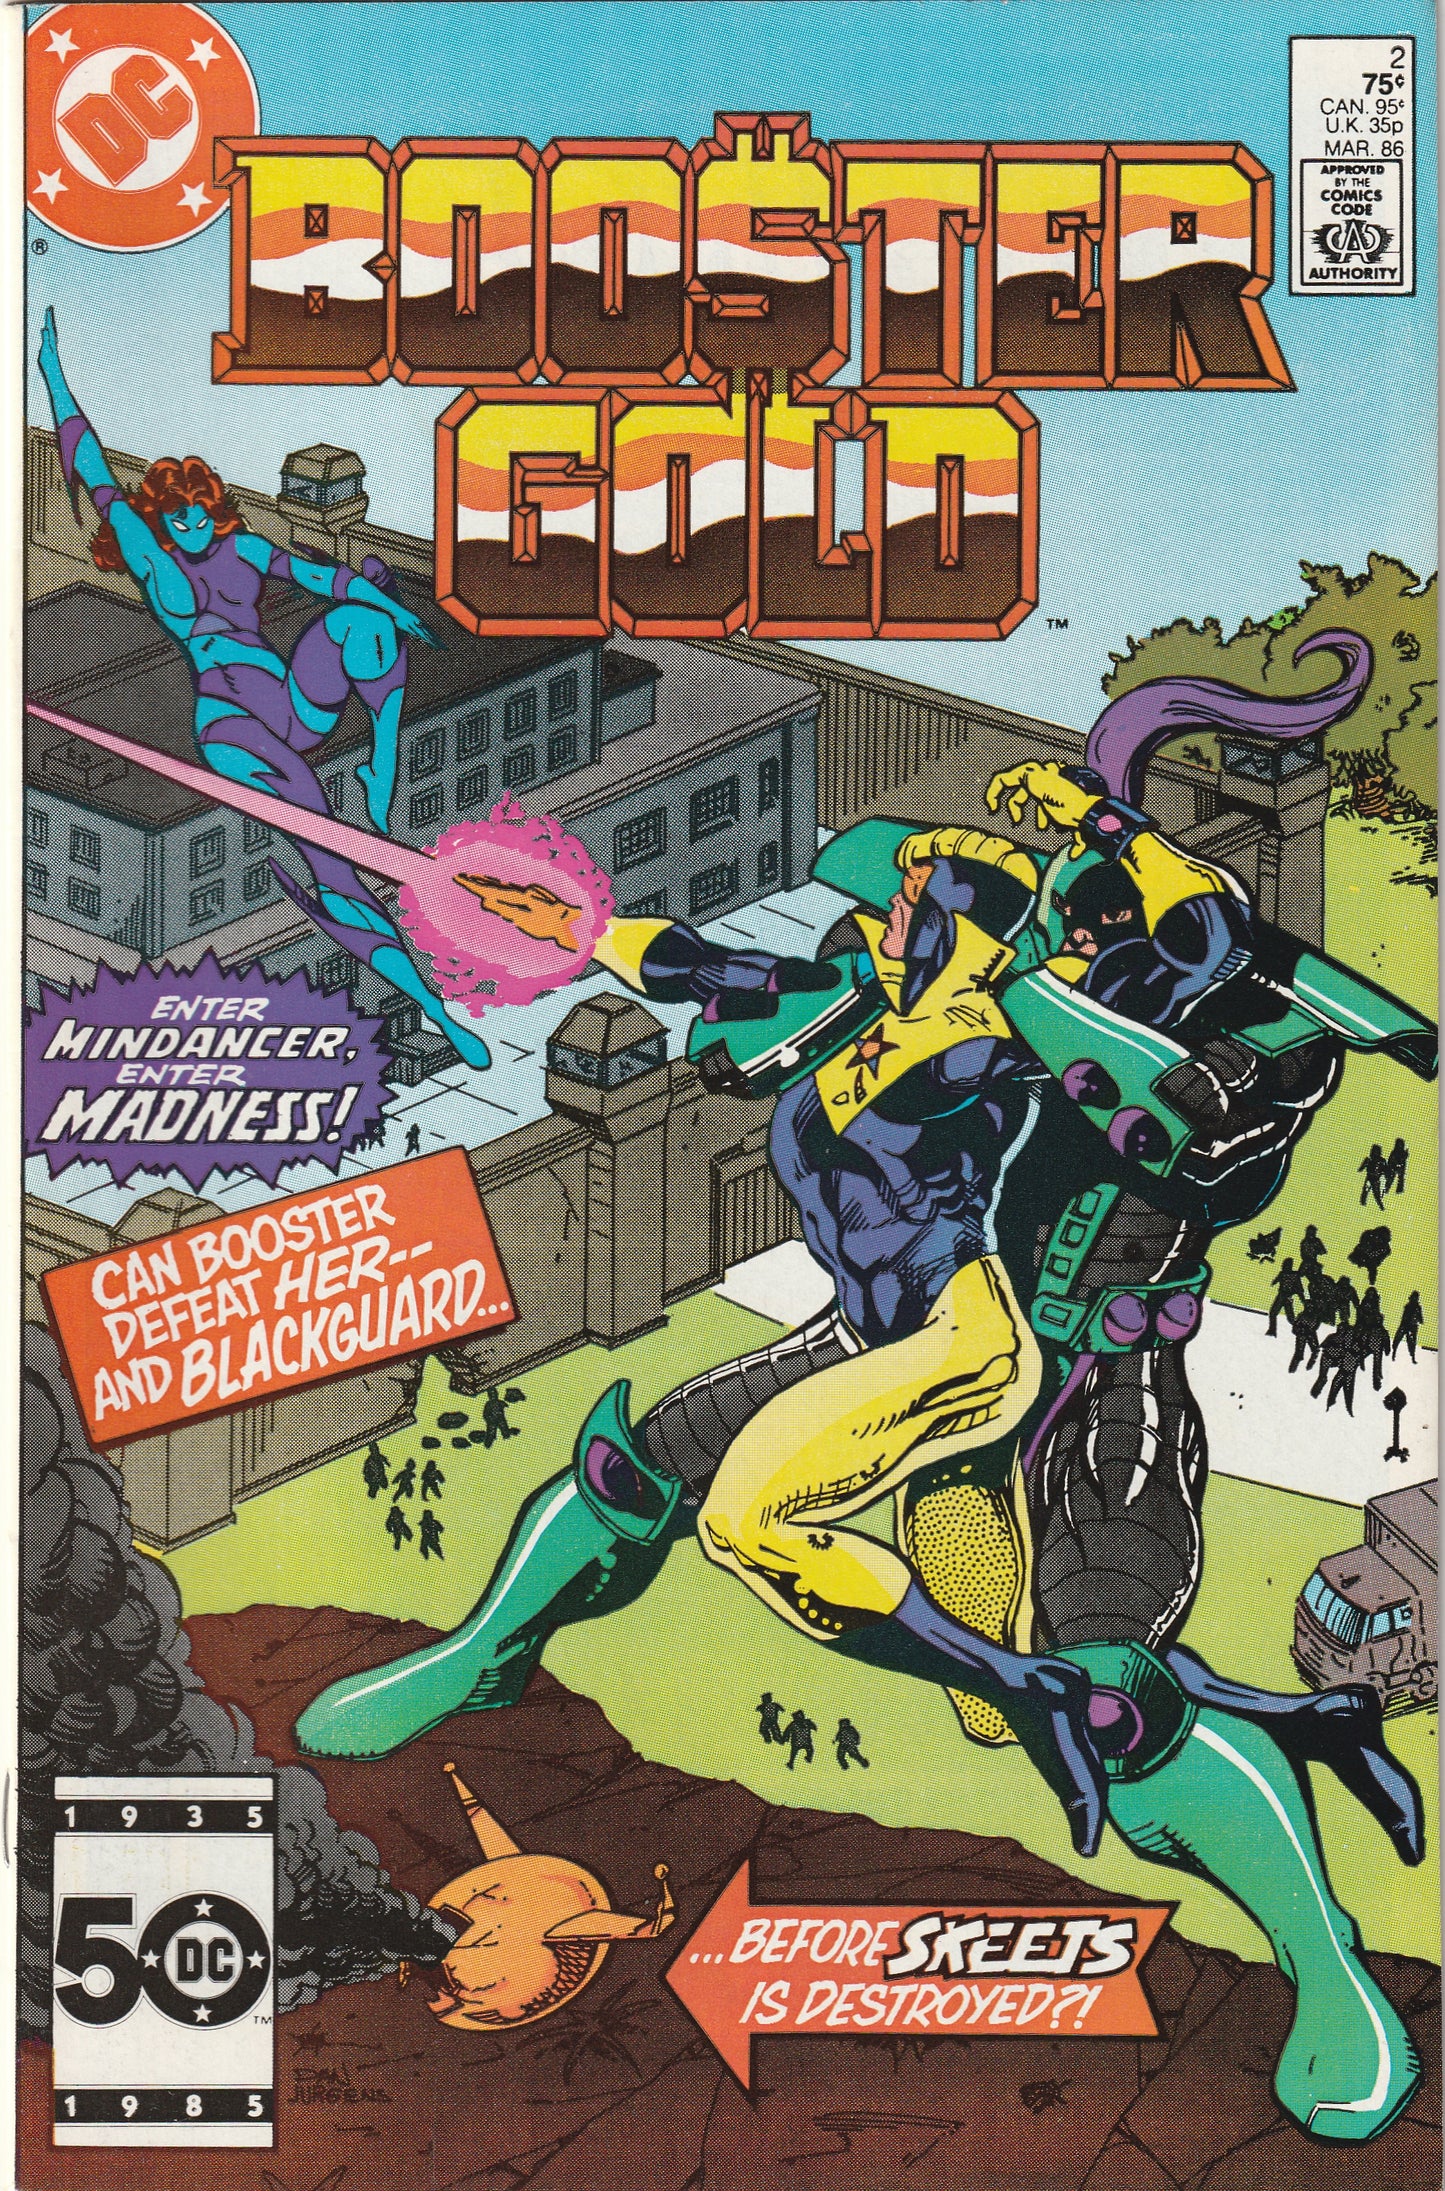 Booster Gold #2 (1986) - 2nd Appearance of Booster Gold